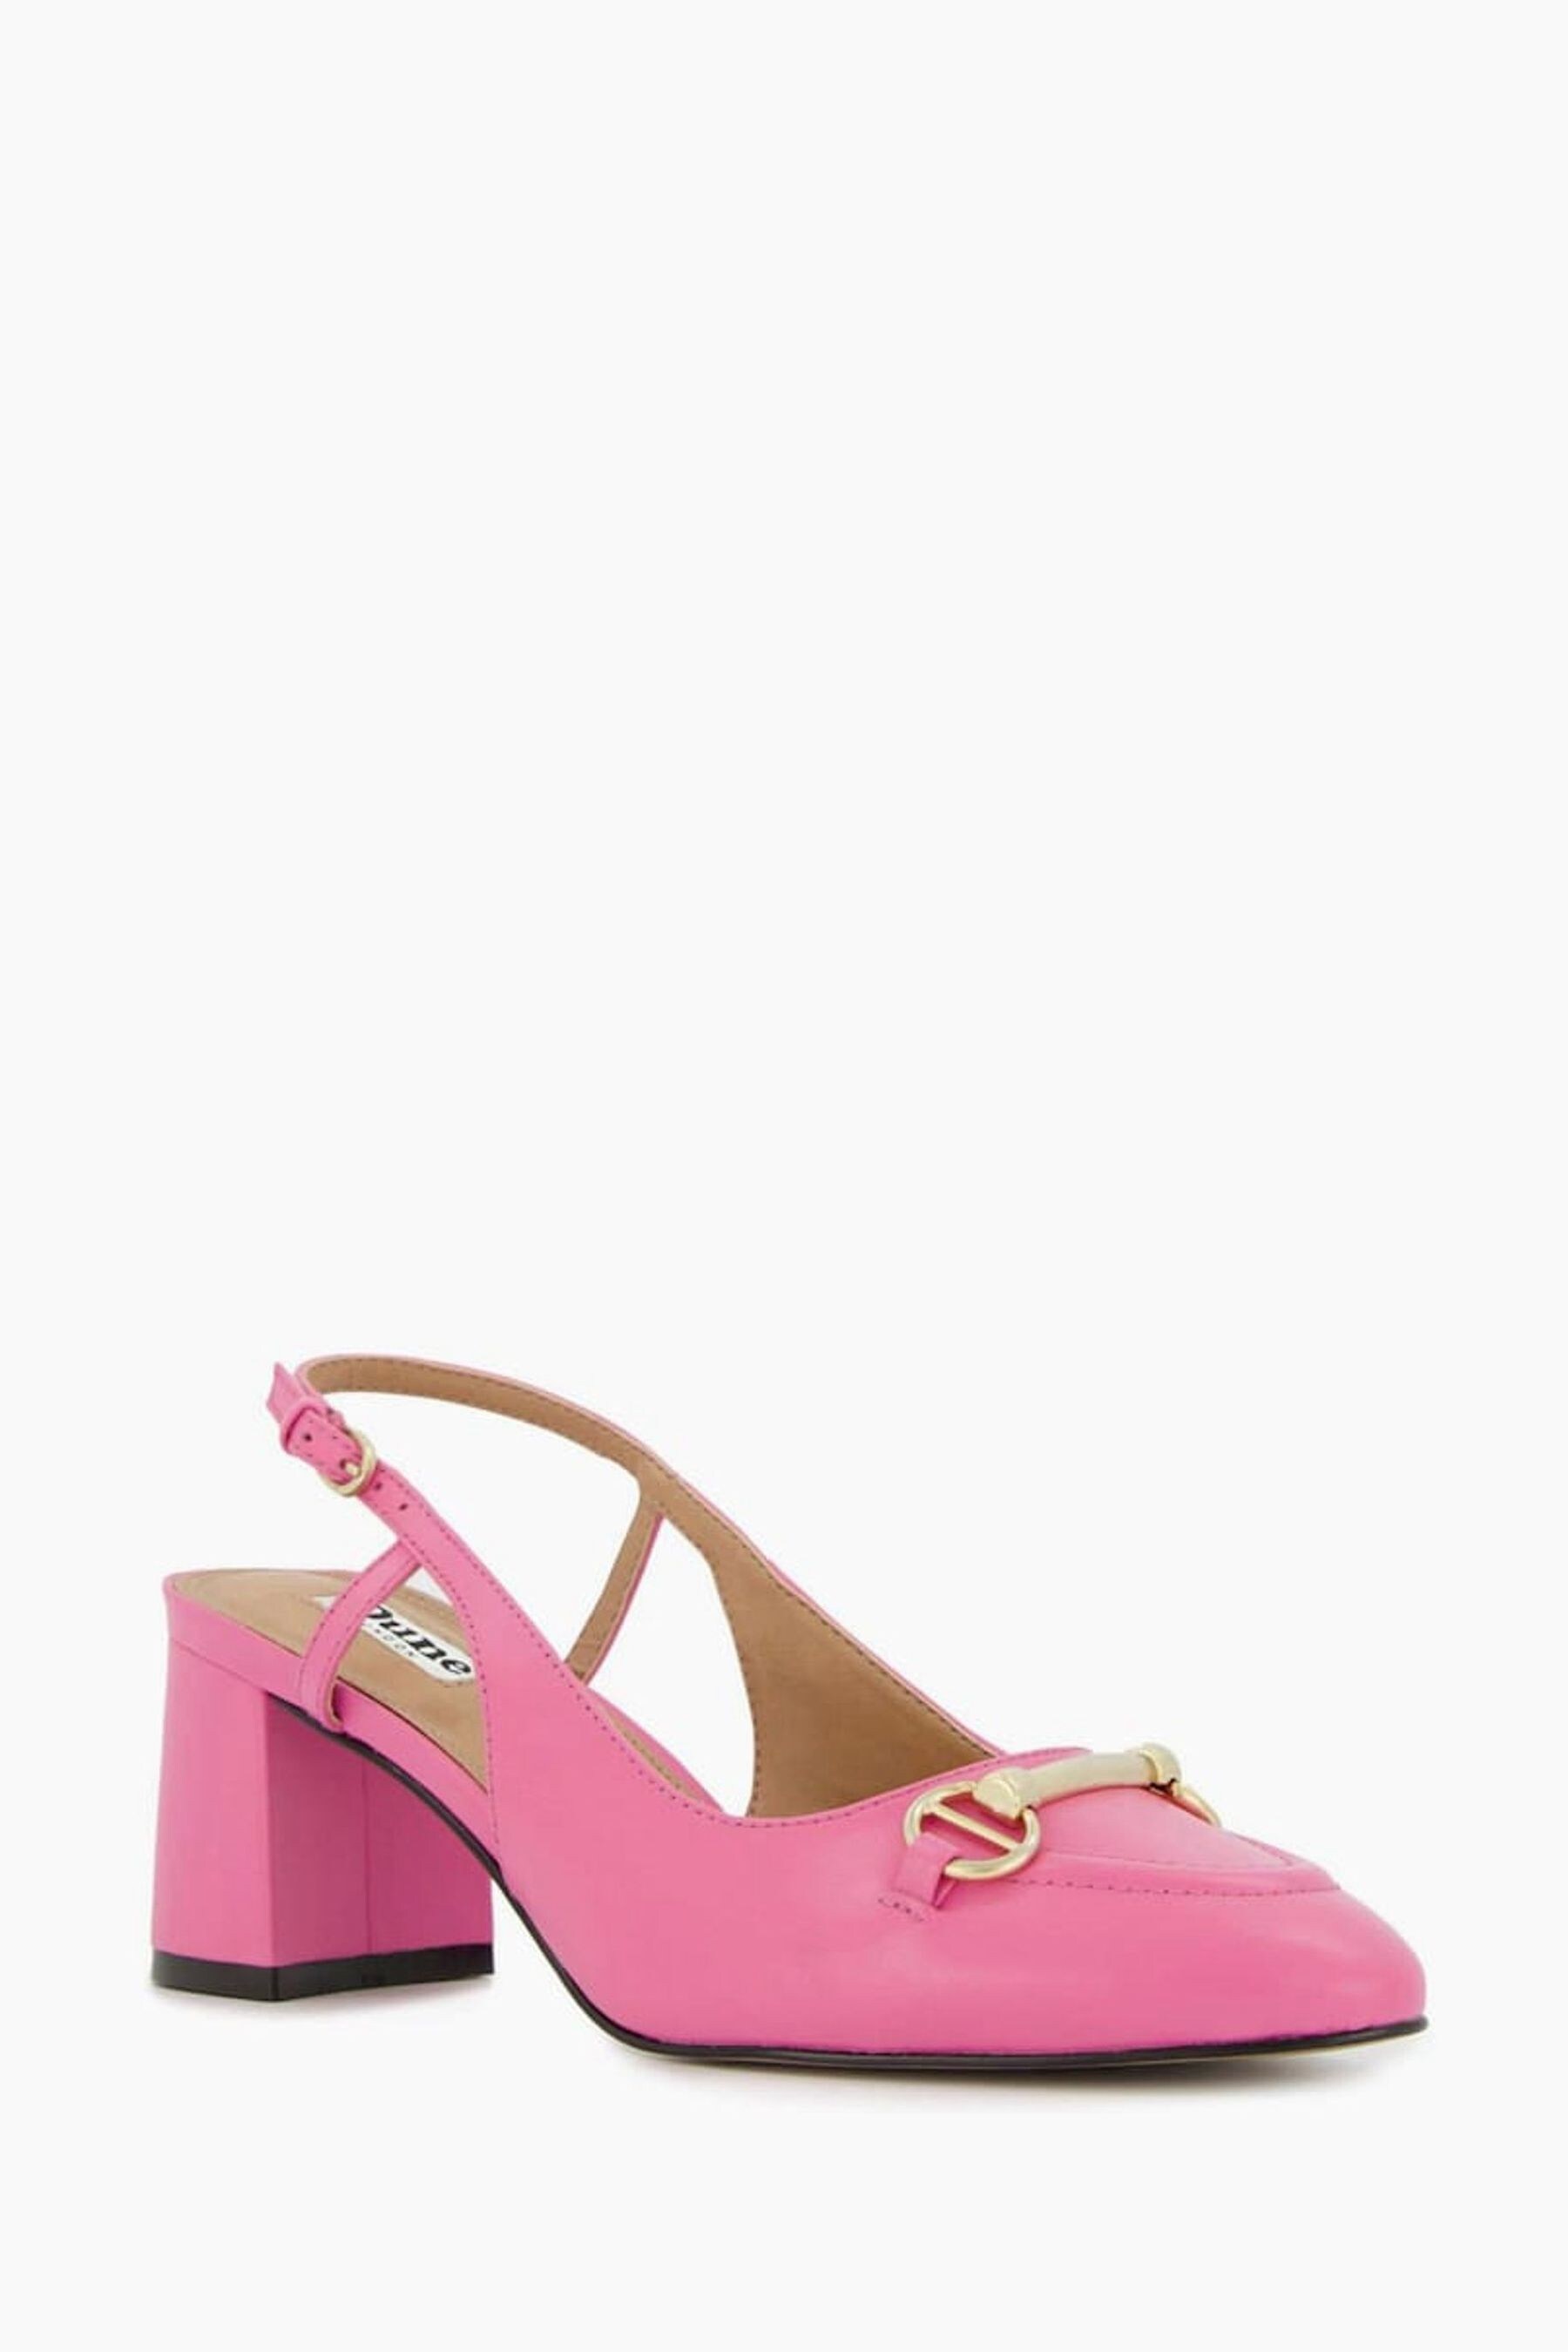 Buy Dune London Pink Cassie Snaffle Trim Slingbacks from the Next UK ...